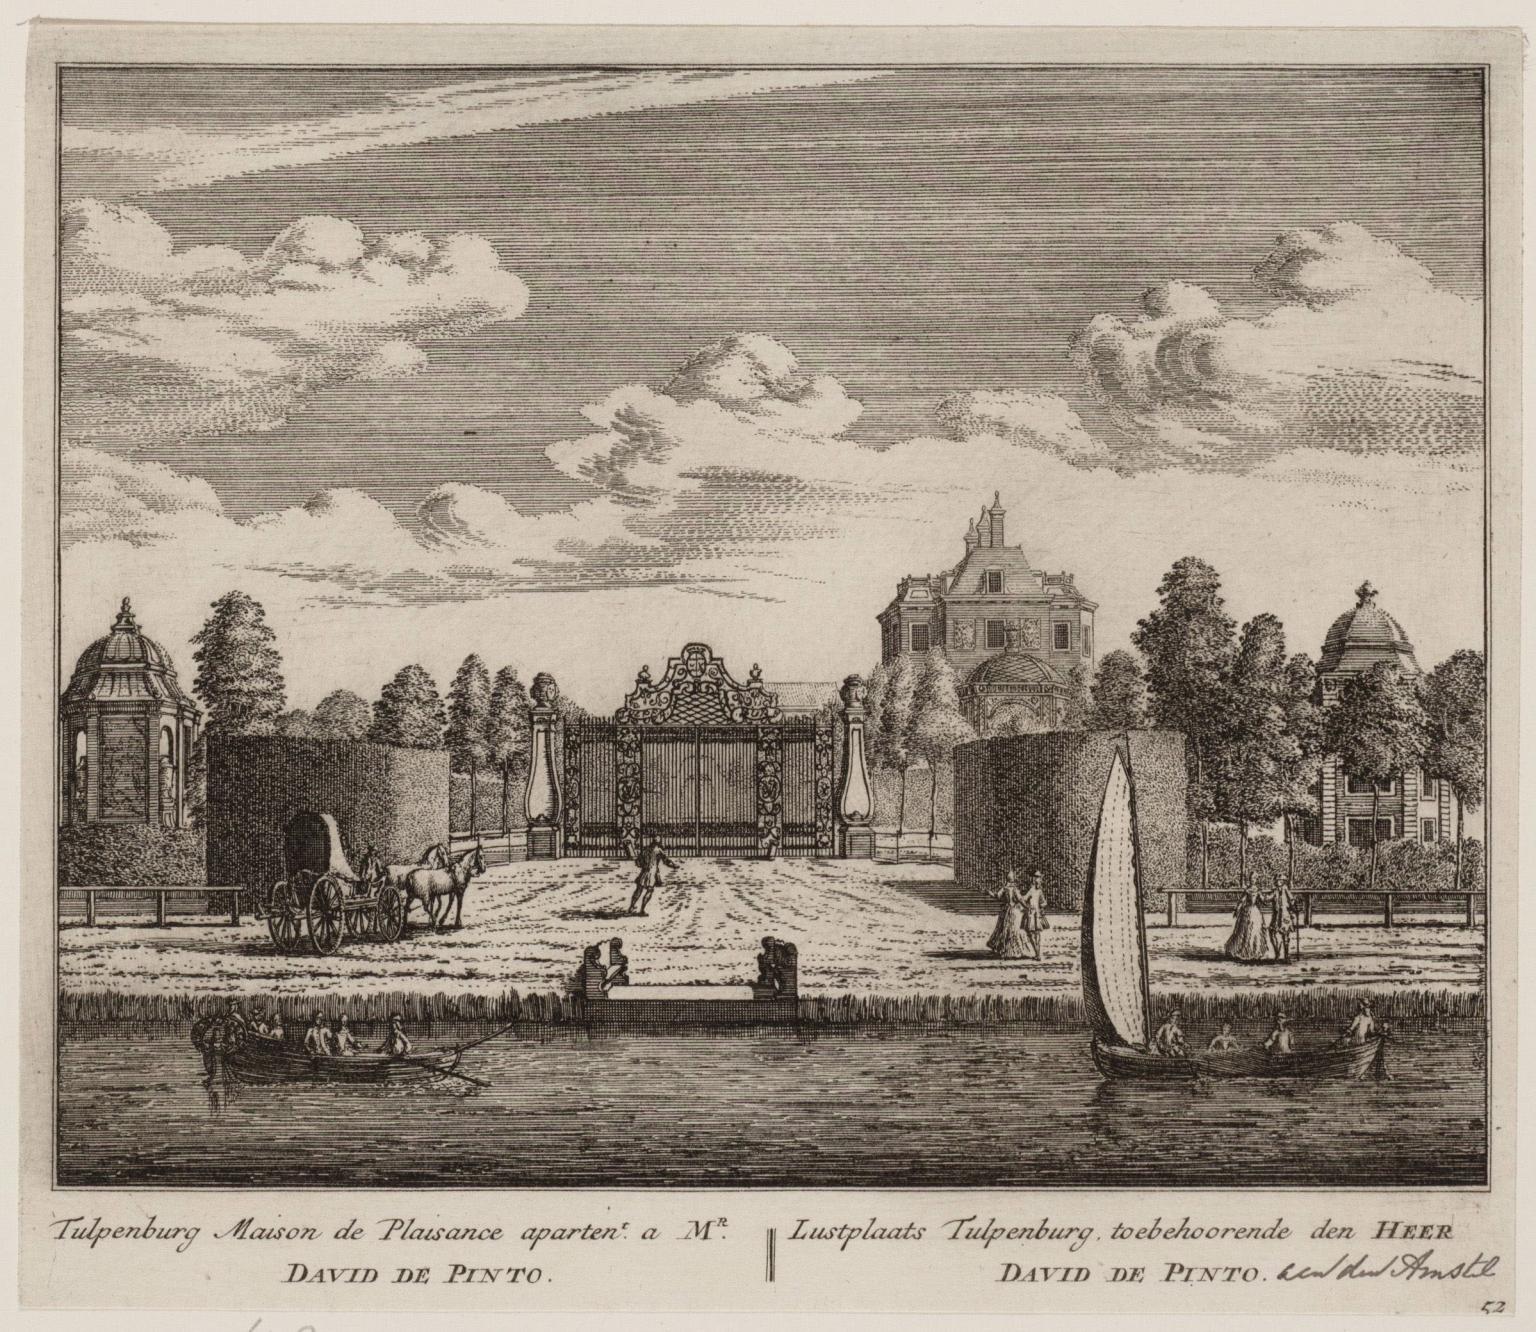 Print of river with boats in foreground and house and trees behind wall in background.